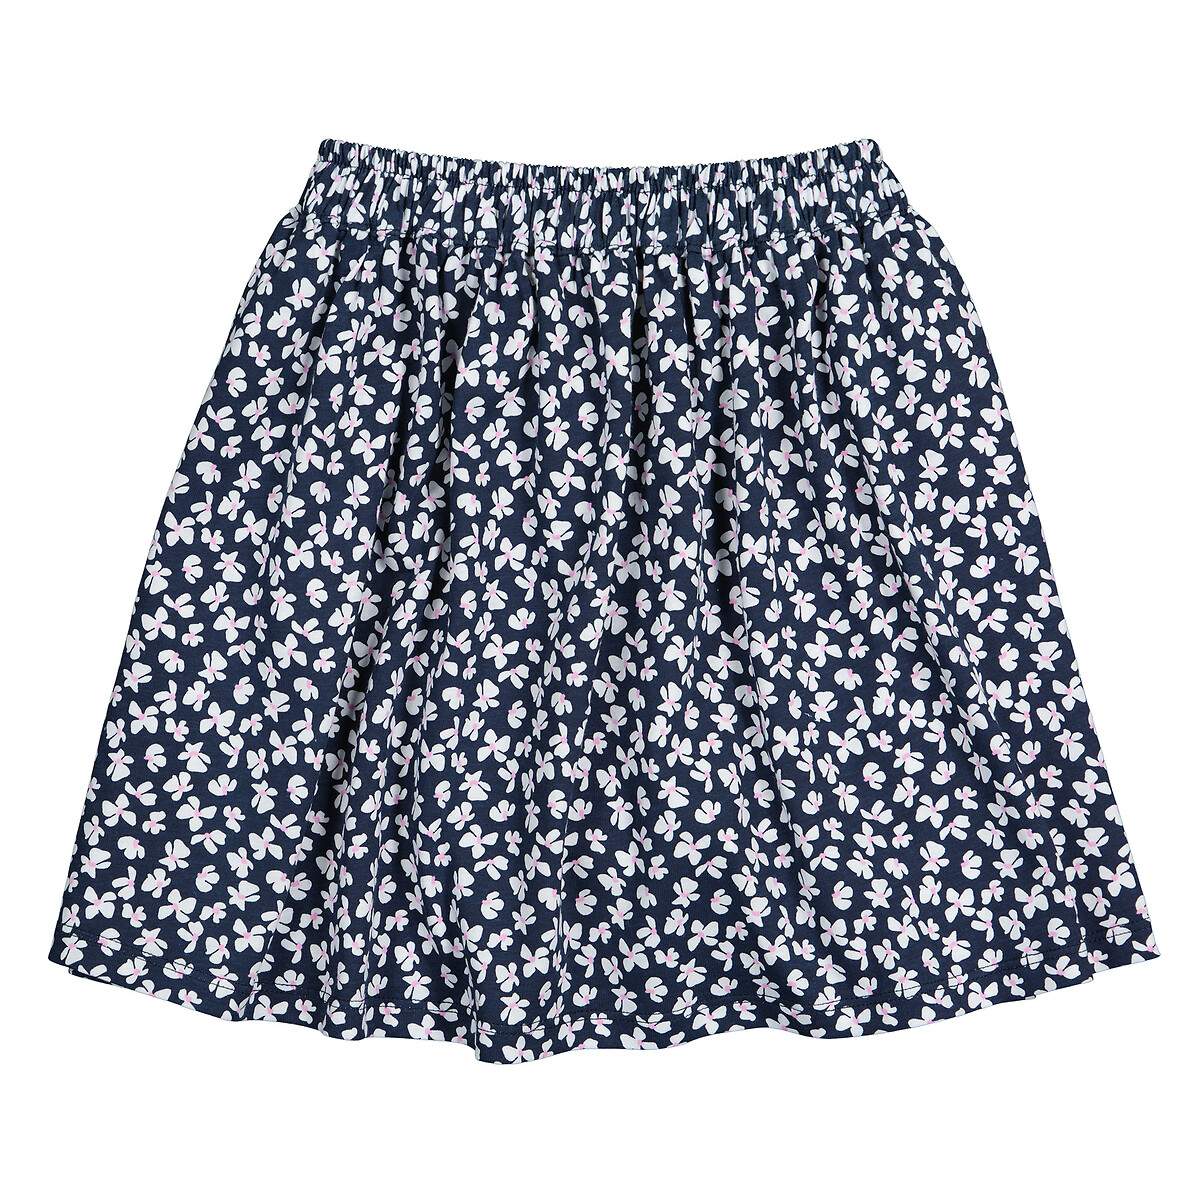 Floral cotton full skirt, navy print, La Redoute Collections | La Redoute